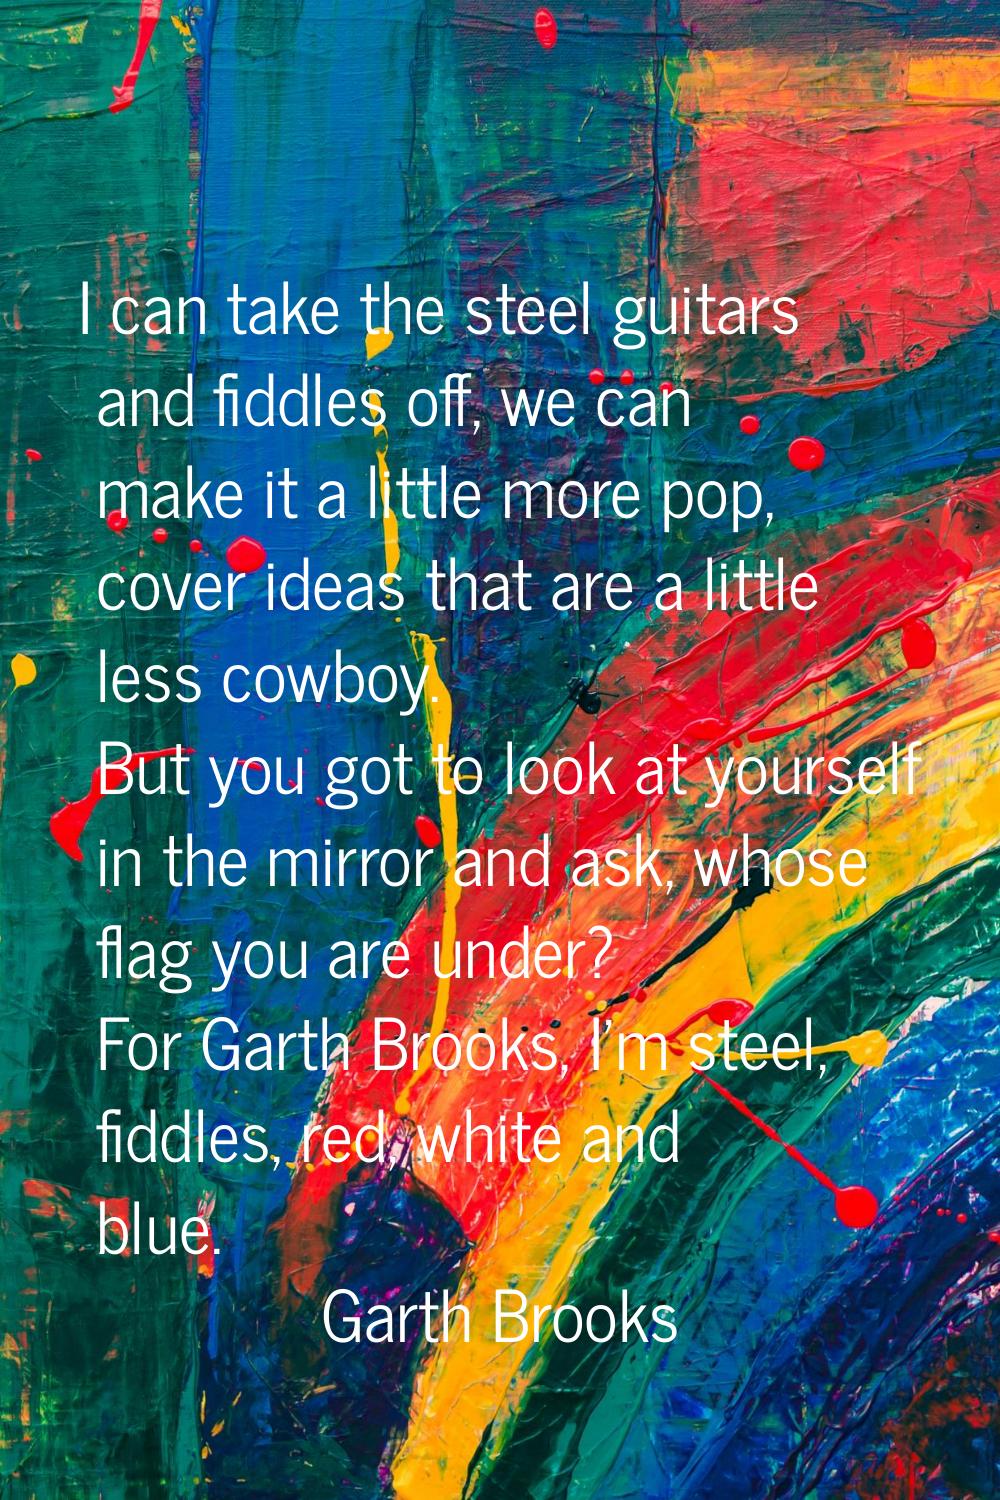 I can take the steel guitars and fiddles off, we can make it a little more pop, cover ideas that ar